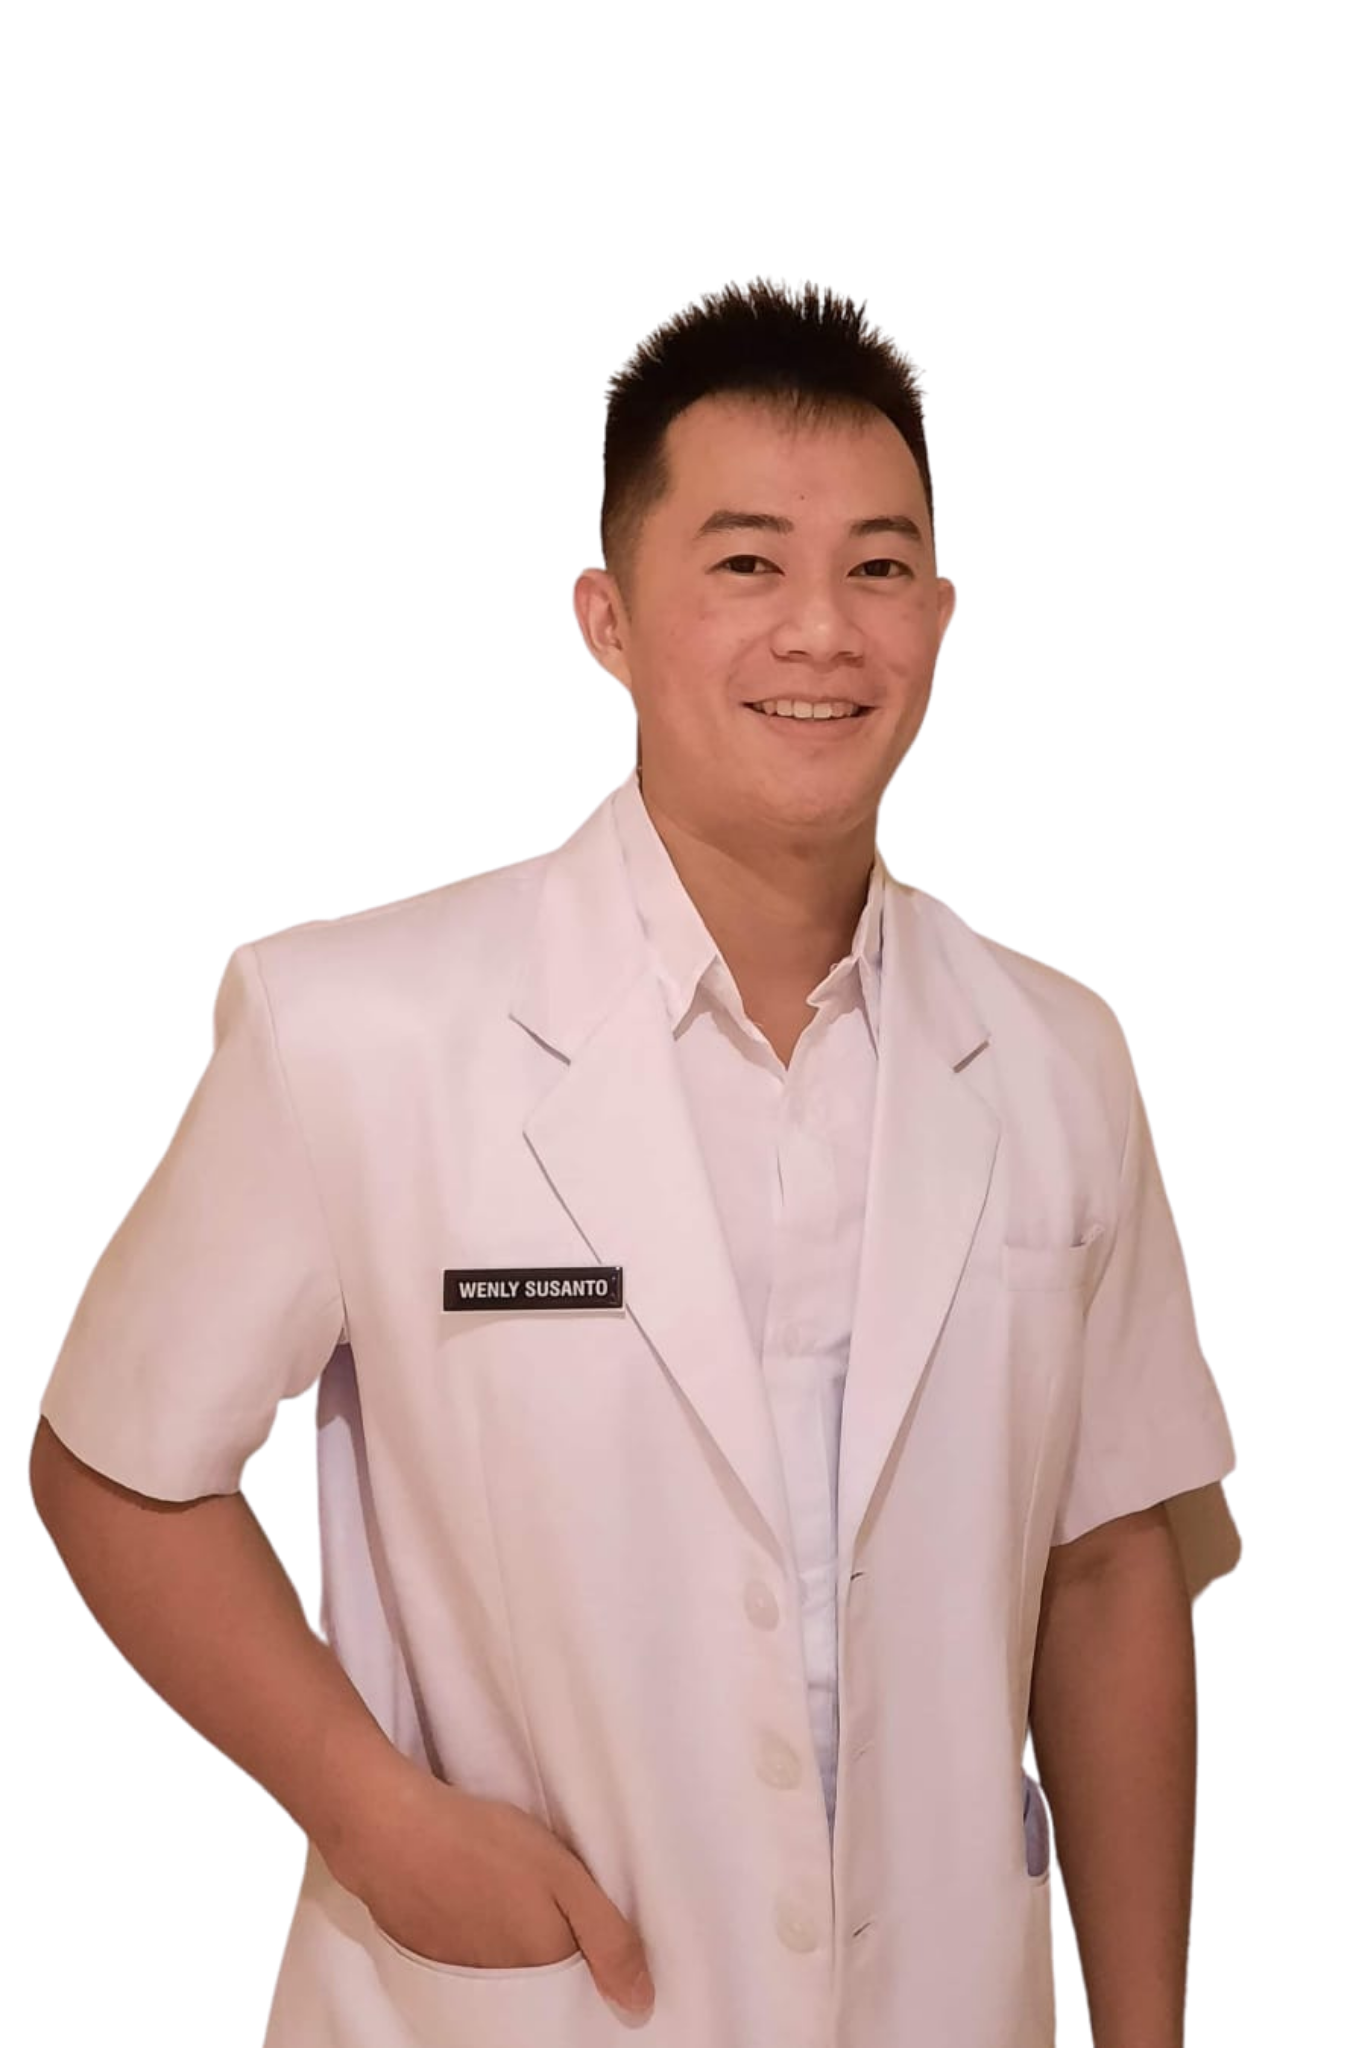 dr. Wenly Susanto